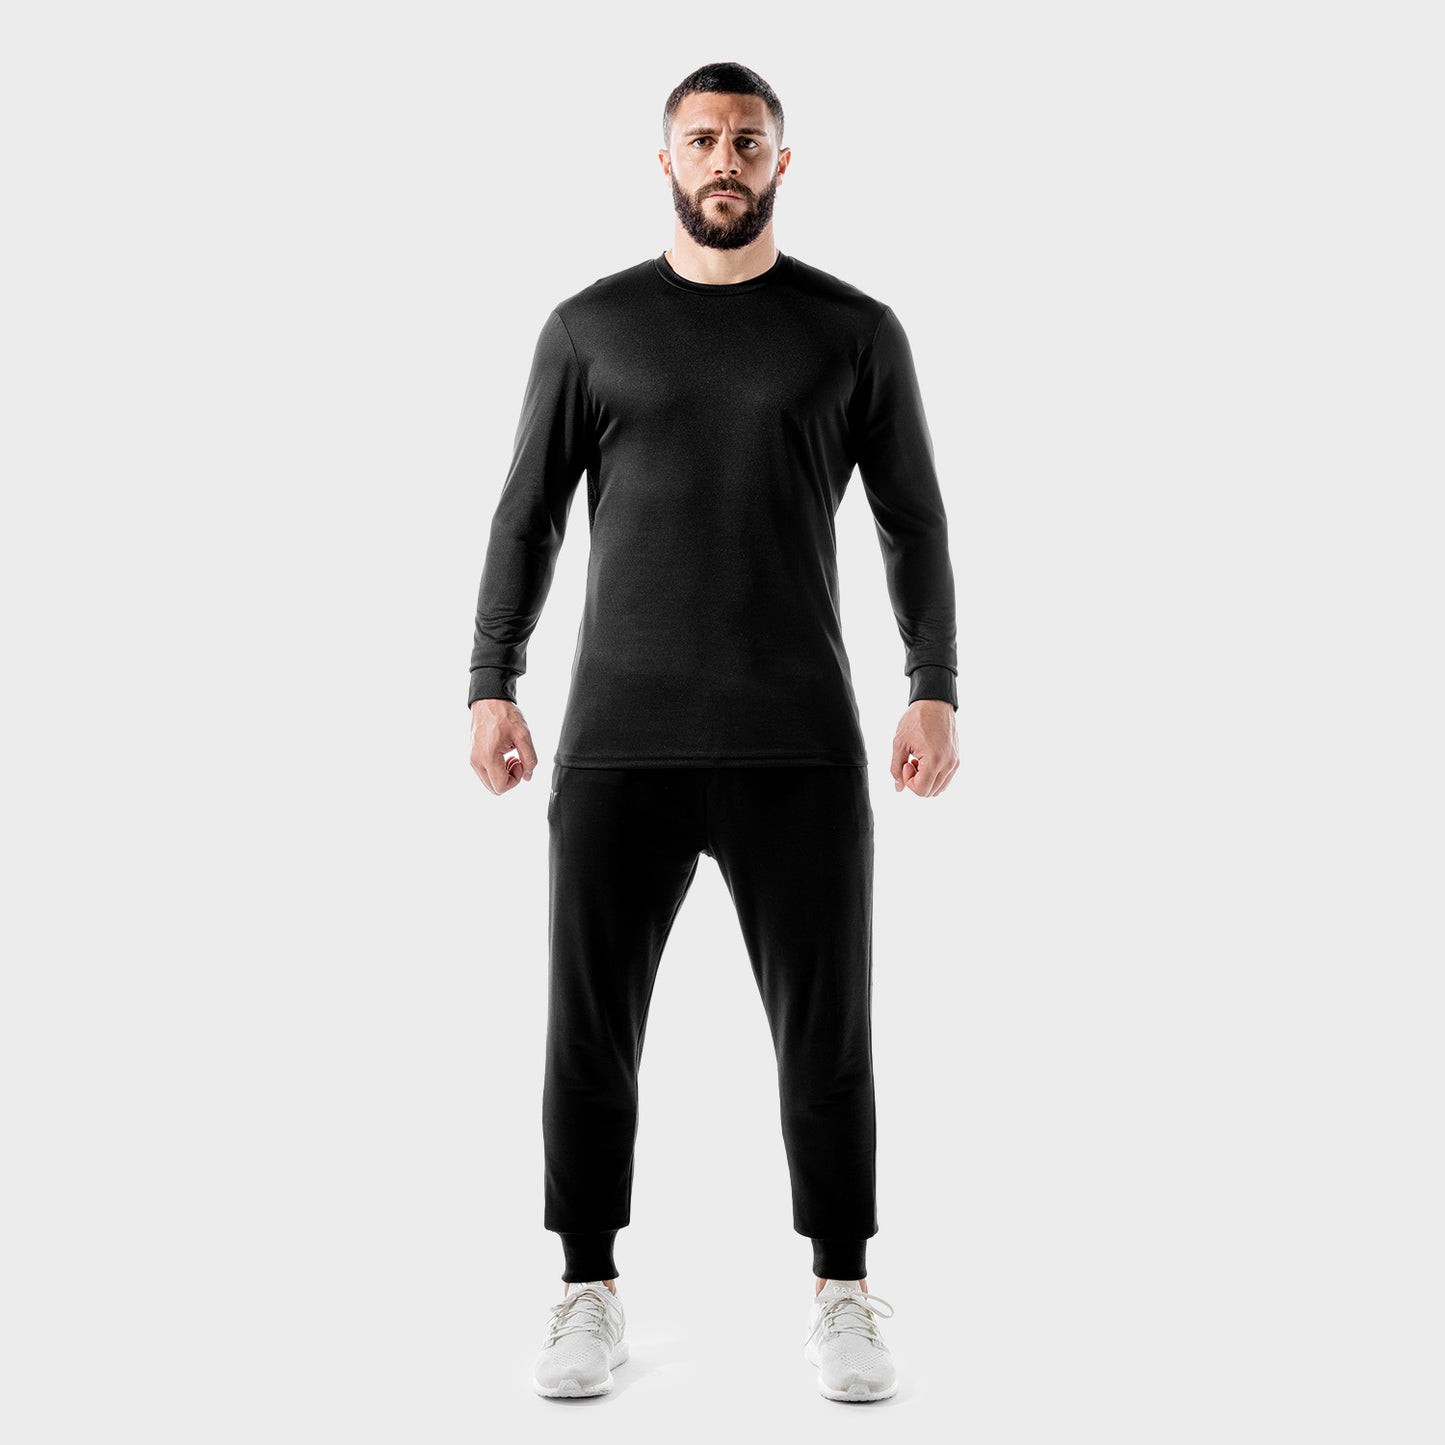 squatwolf-gym-wear-lab360-performance-crew-top-black-running-tops-for-men